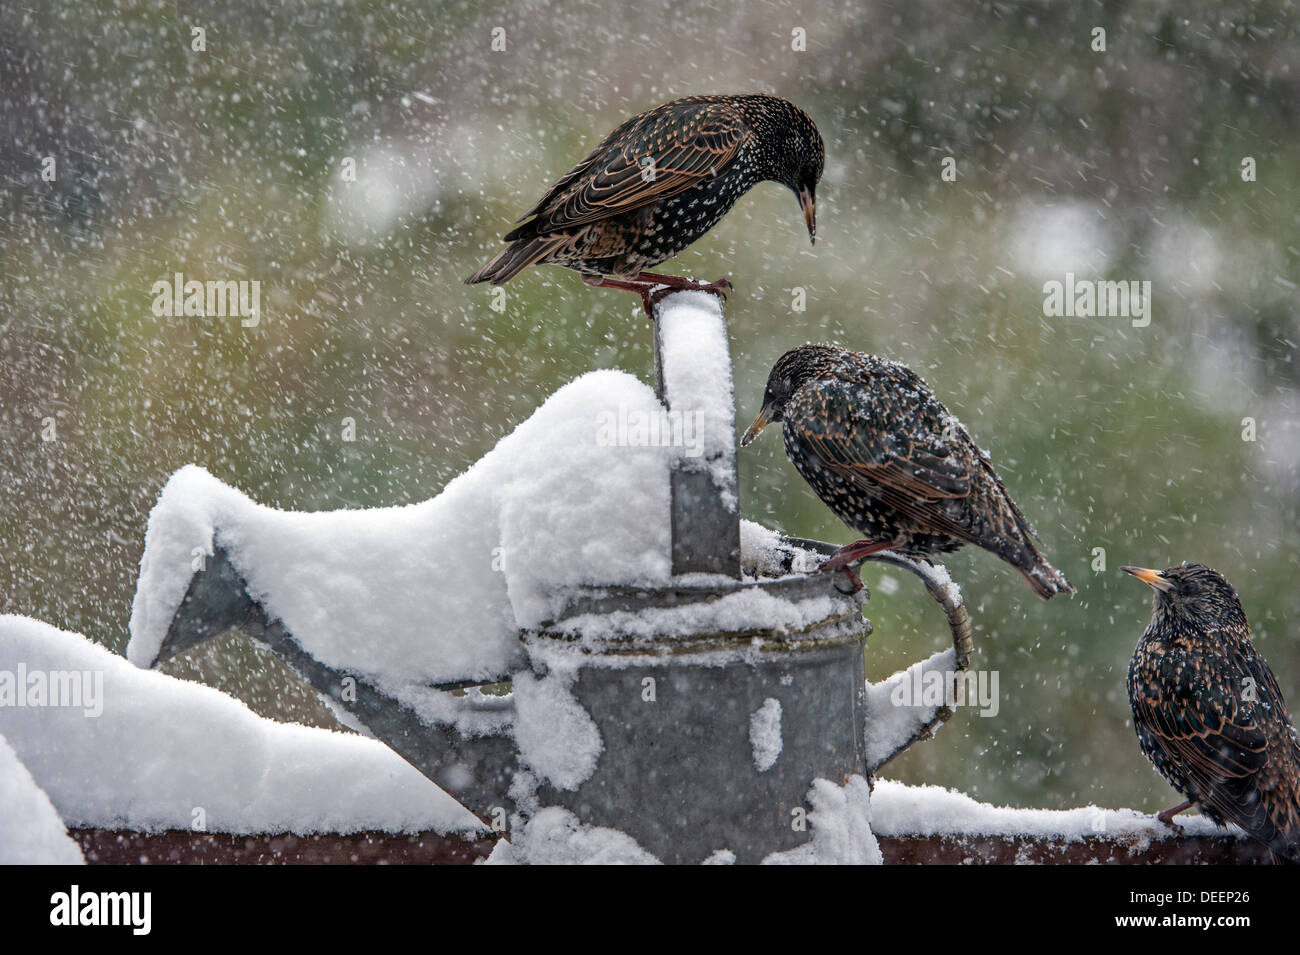 Common Starlings / European Starling (Sturnus vulgaris) perched on metal watering can in garden during snow shower in winter Stock Photo